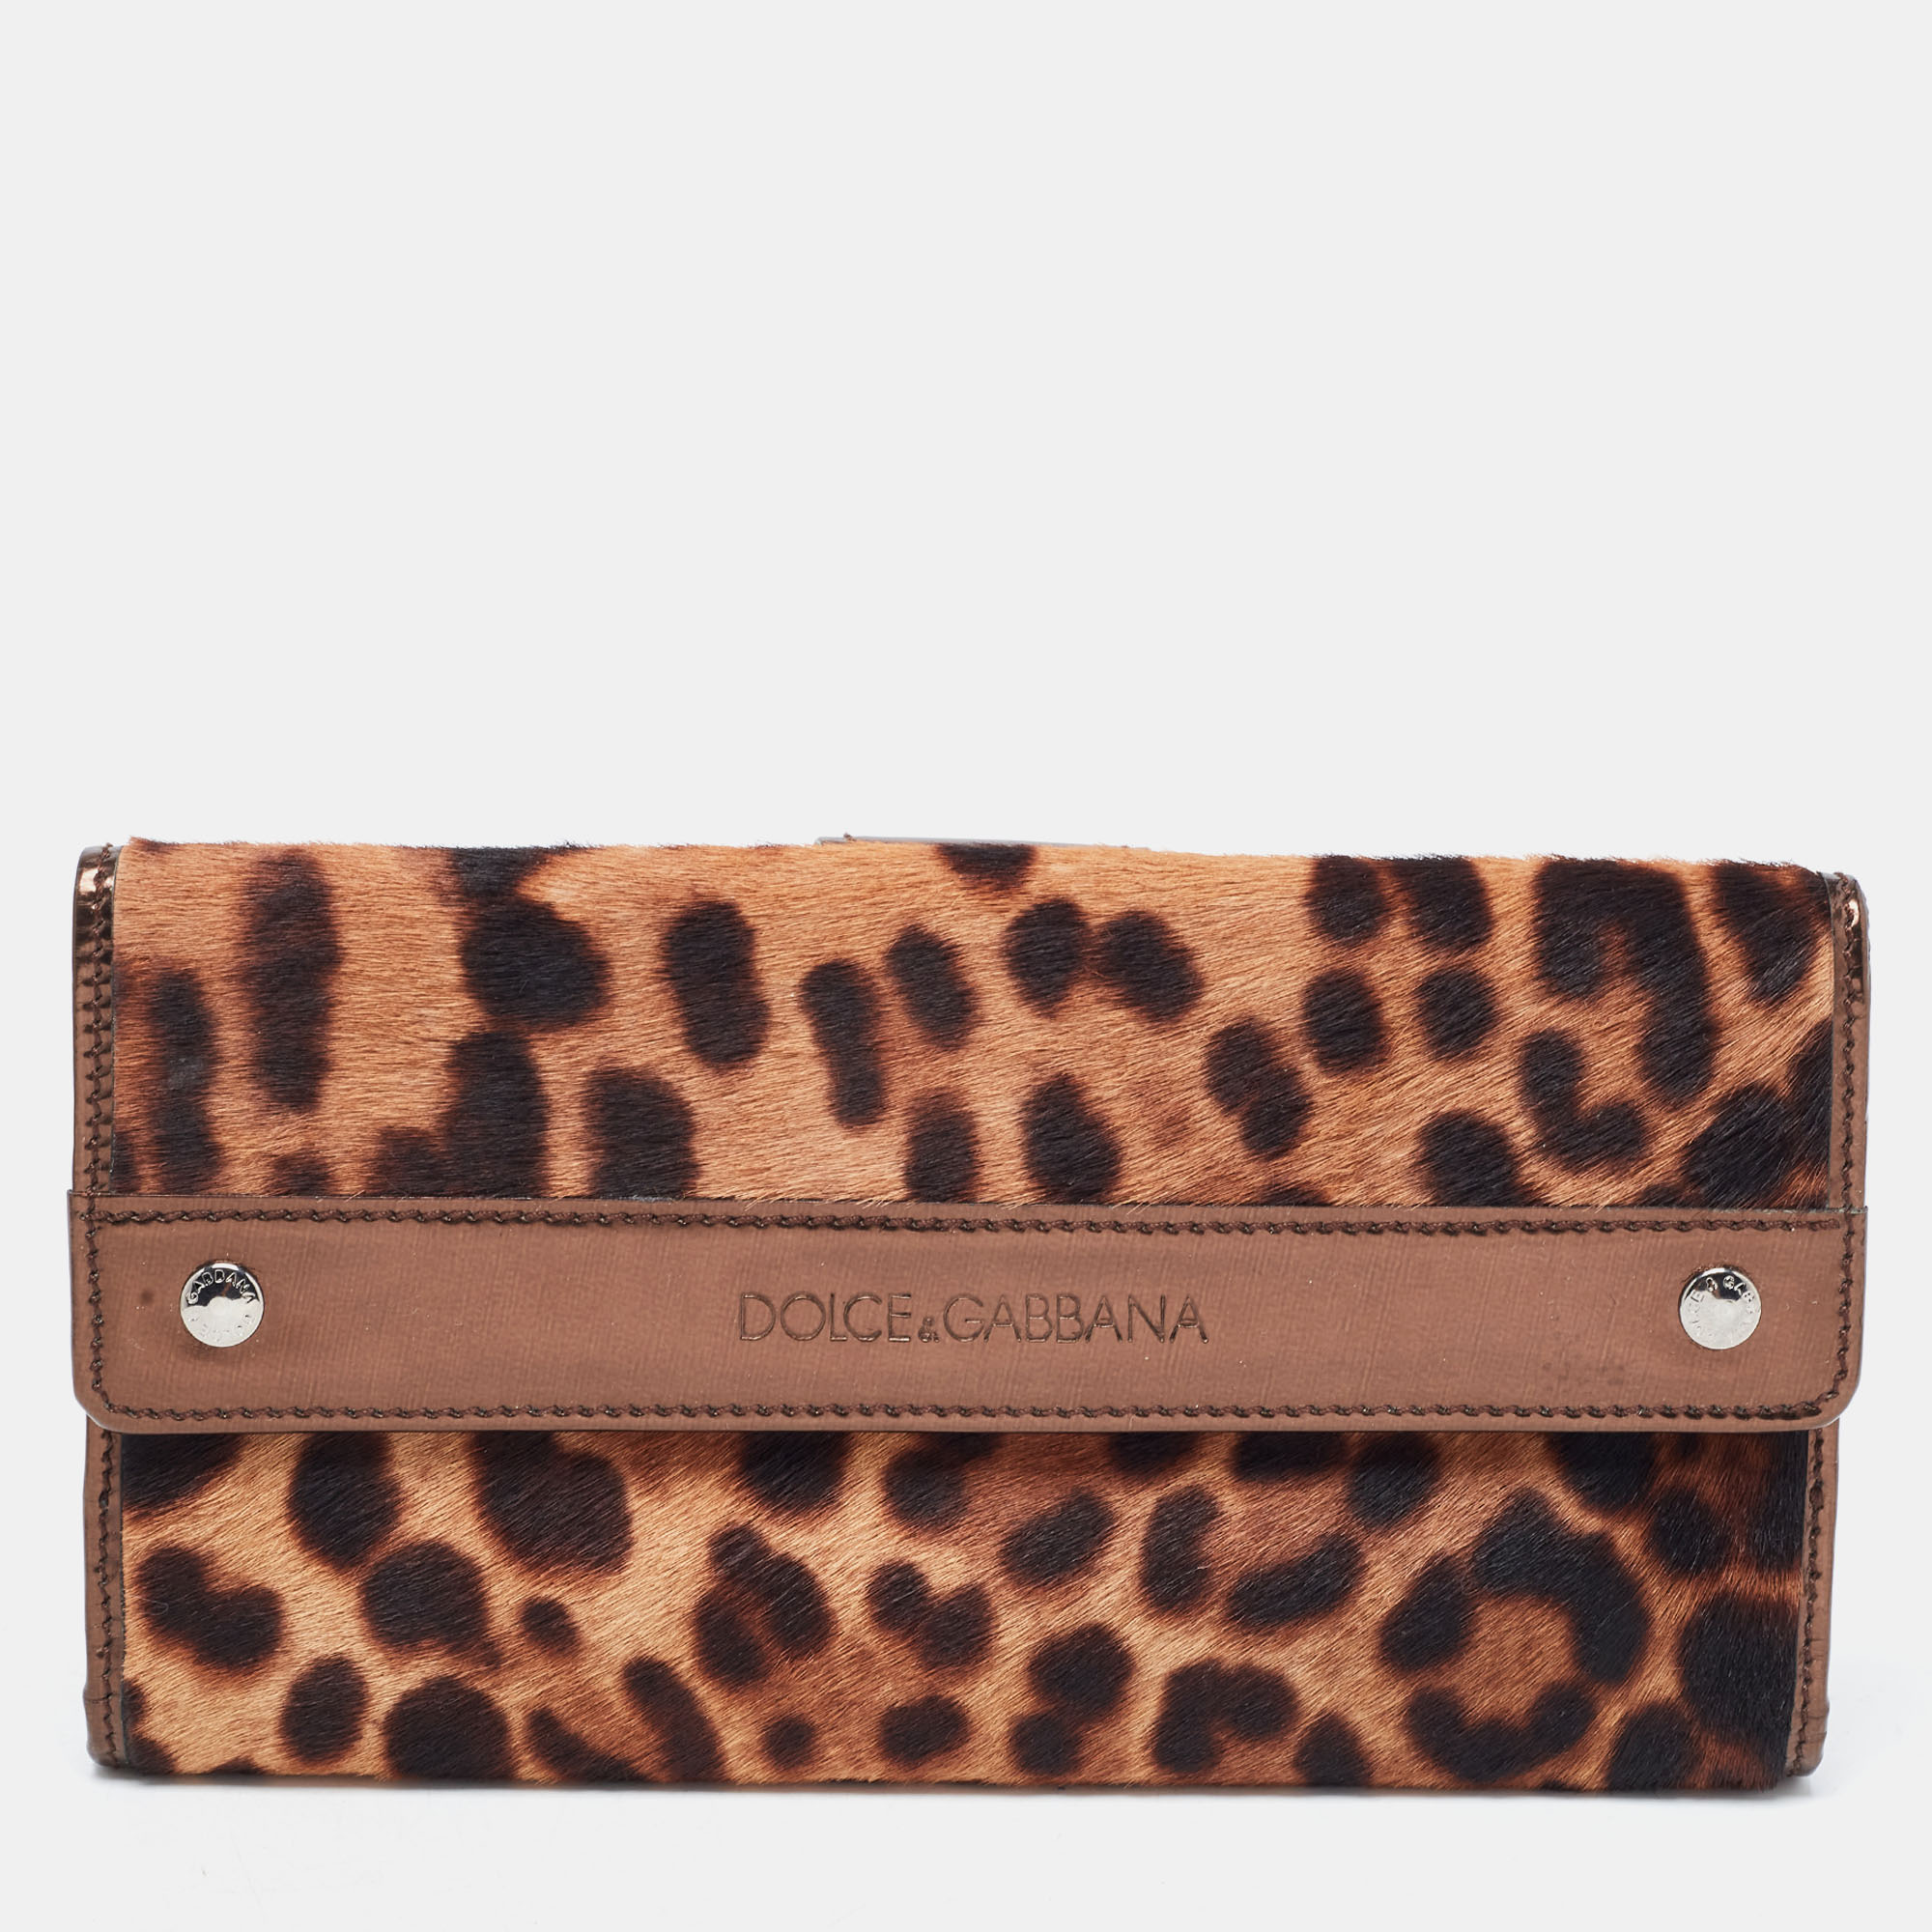 

Dolce & Gabbana Brown Leopard Print Calfhair and Patent Leather Continental Wallet